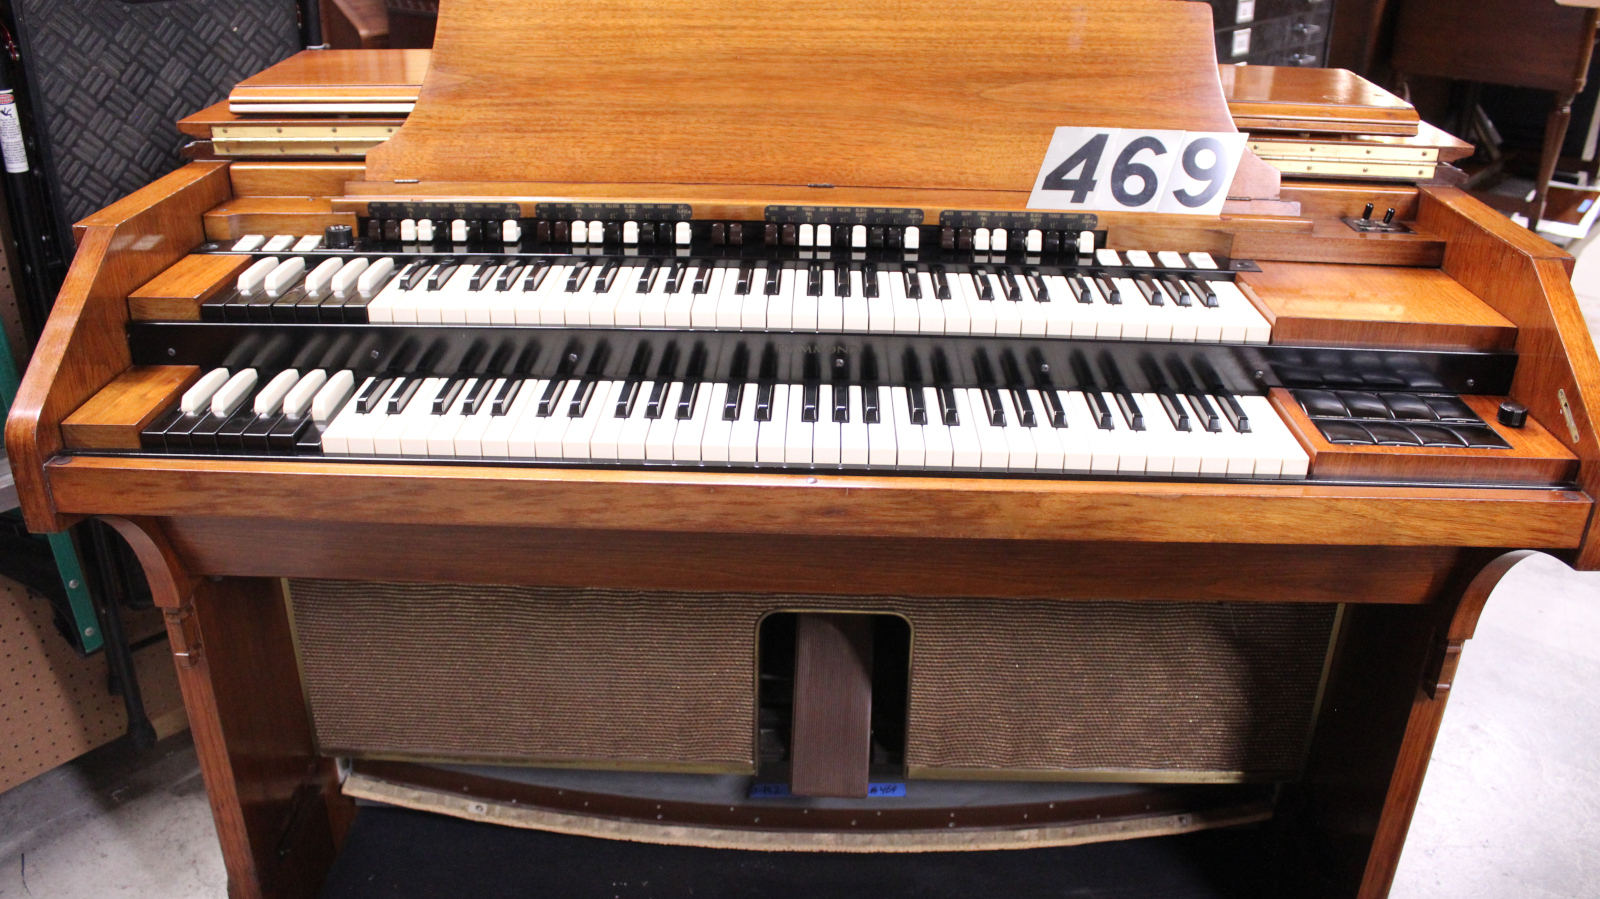 ##469 is a Hammond D152 in a Mahogany finish. Serial #1580